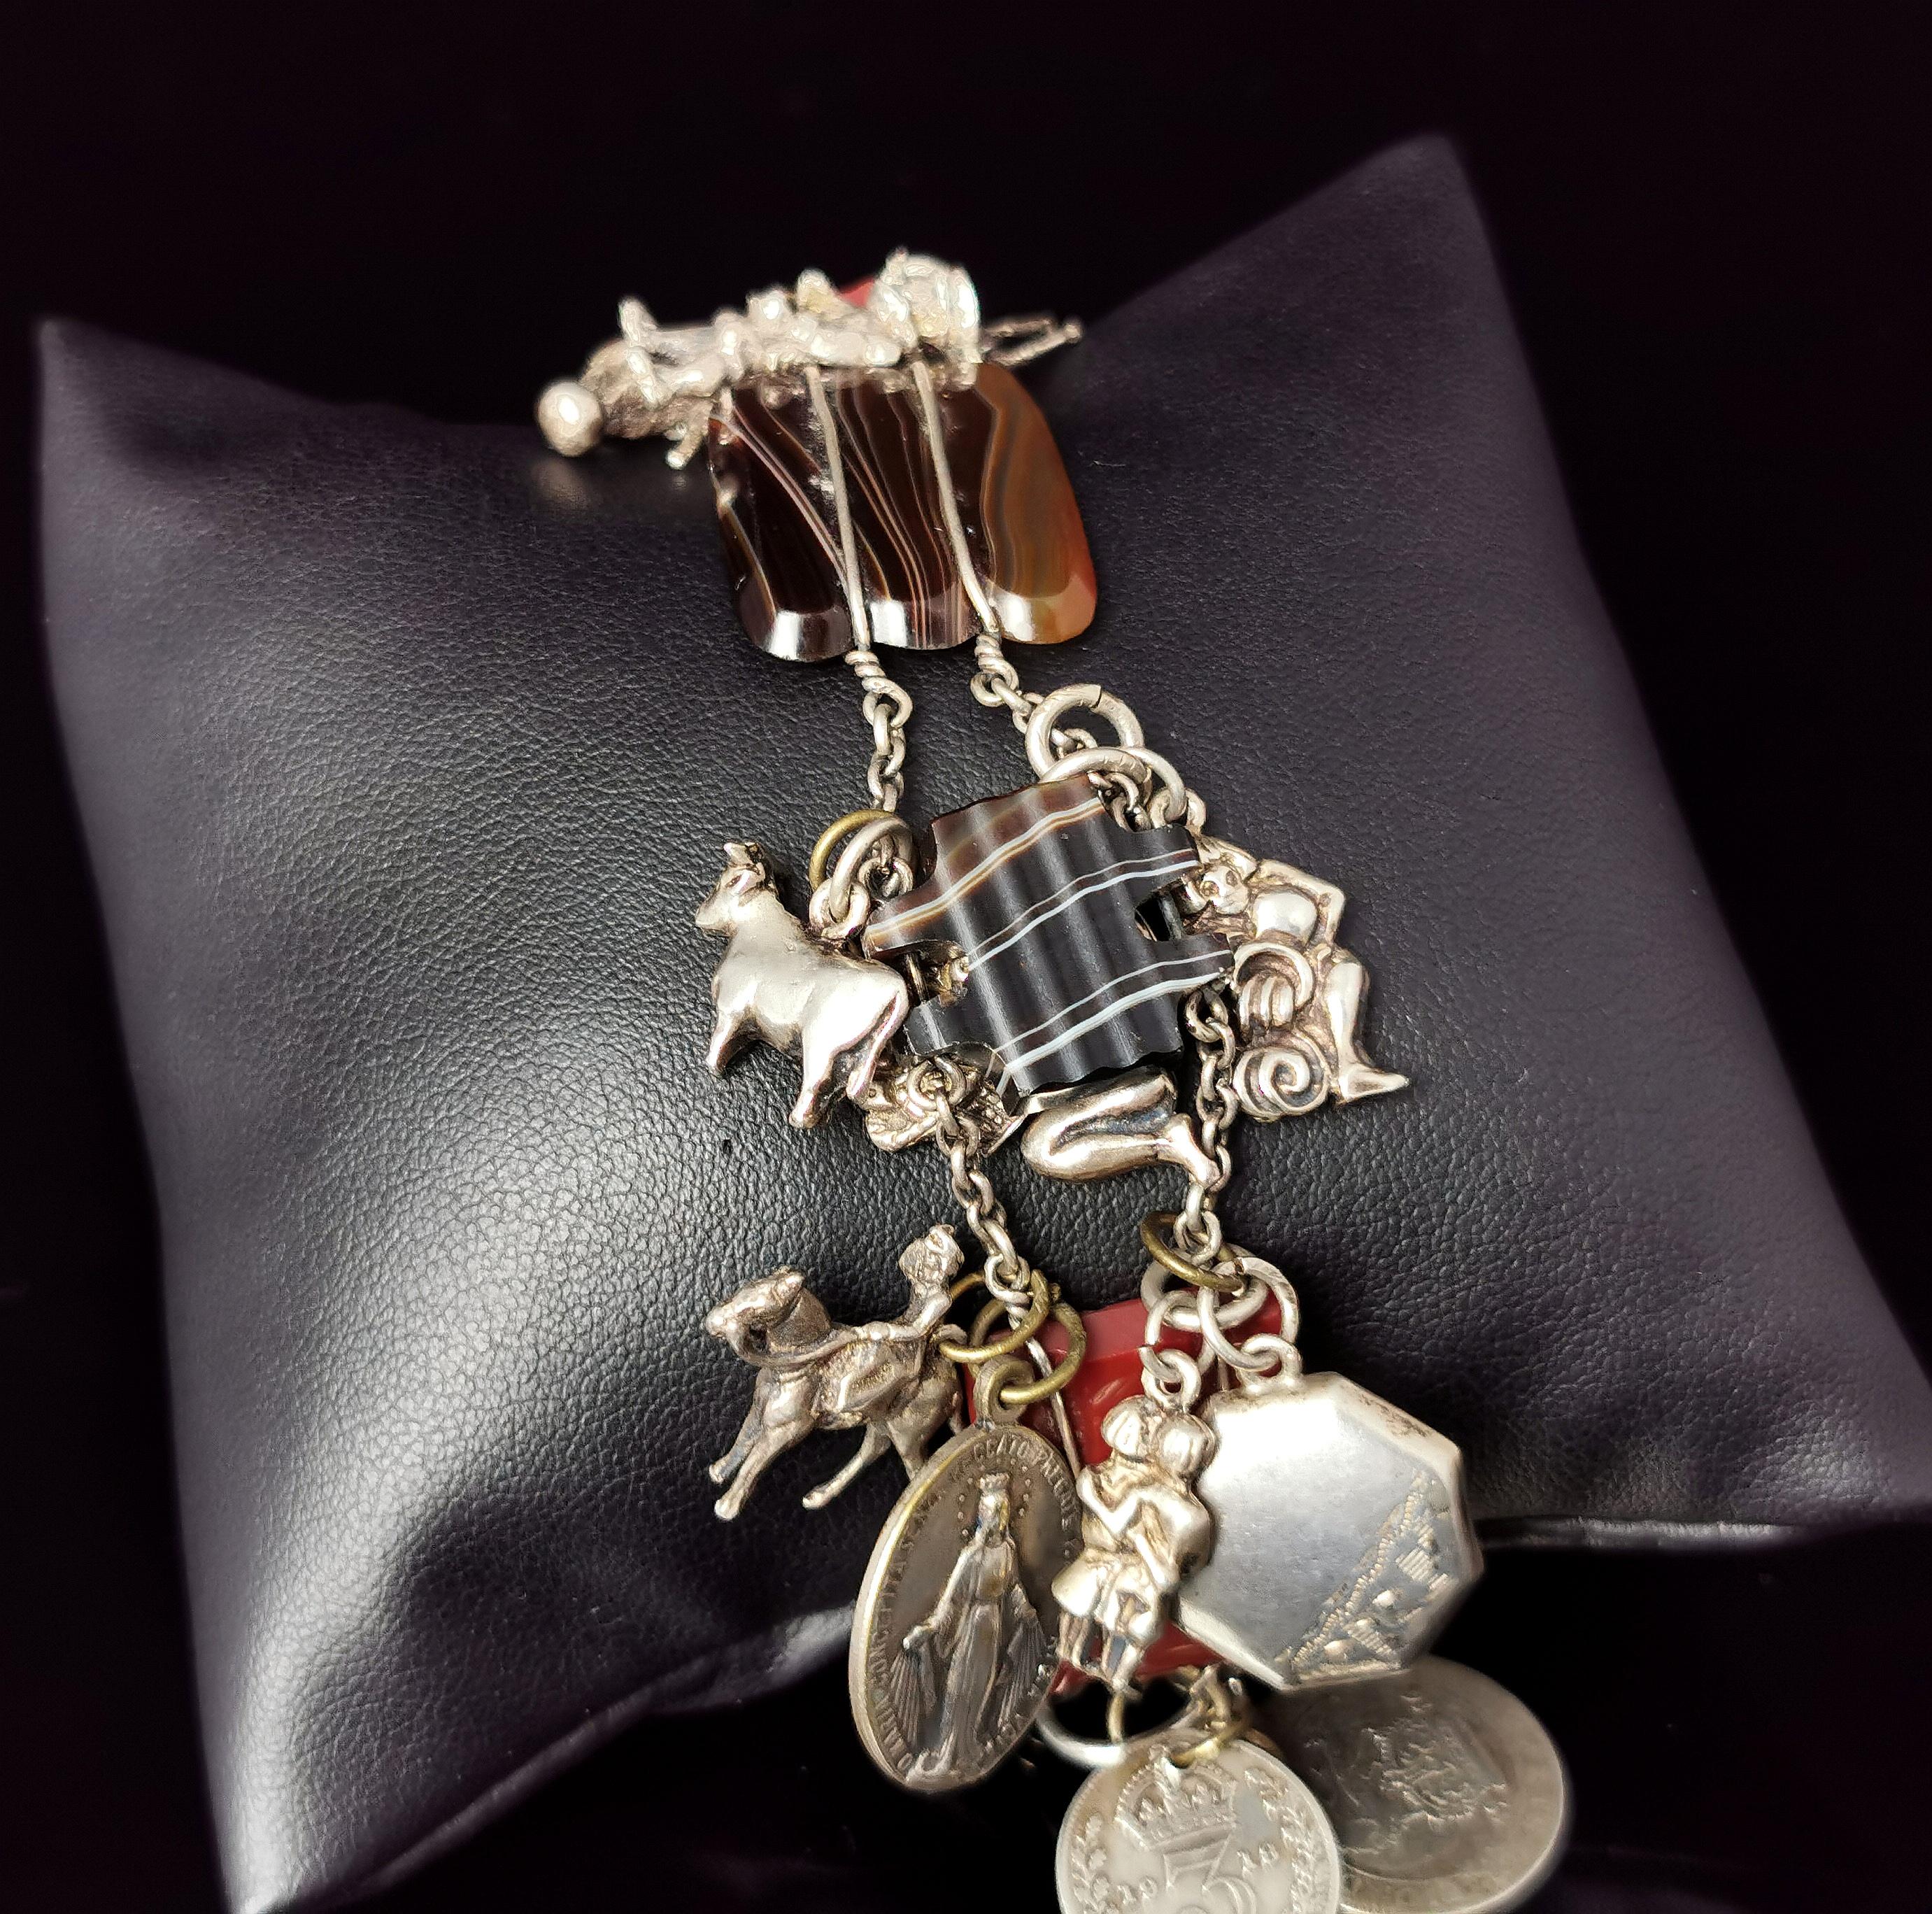 A gorgeous and unusual antique, late Victorian era Scottish agate and Silver charm bracelet.

The bracelet features beautifully faceted panels of polished agate each with different shades, stones include Red Jasper, Carnelian and various shades of